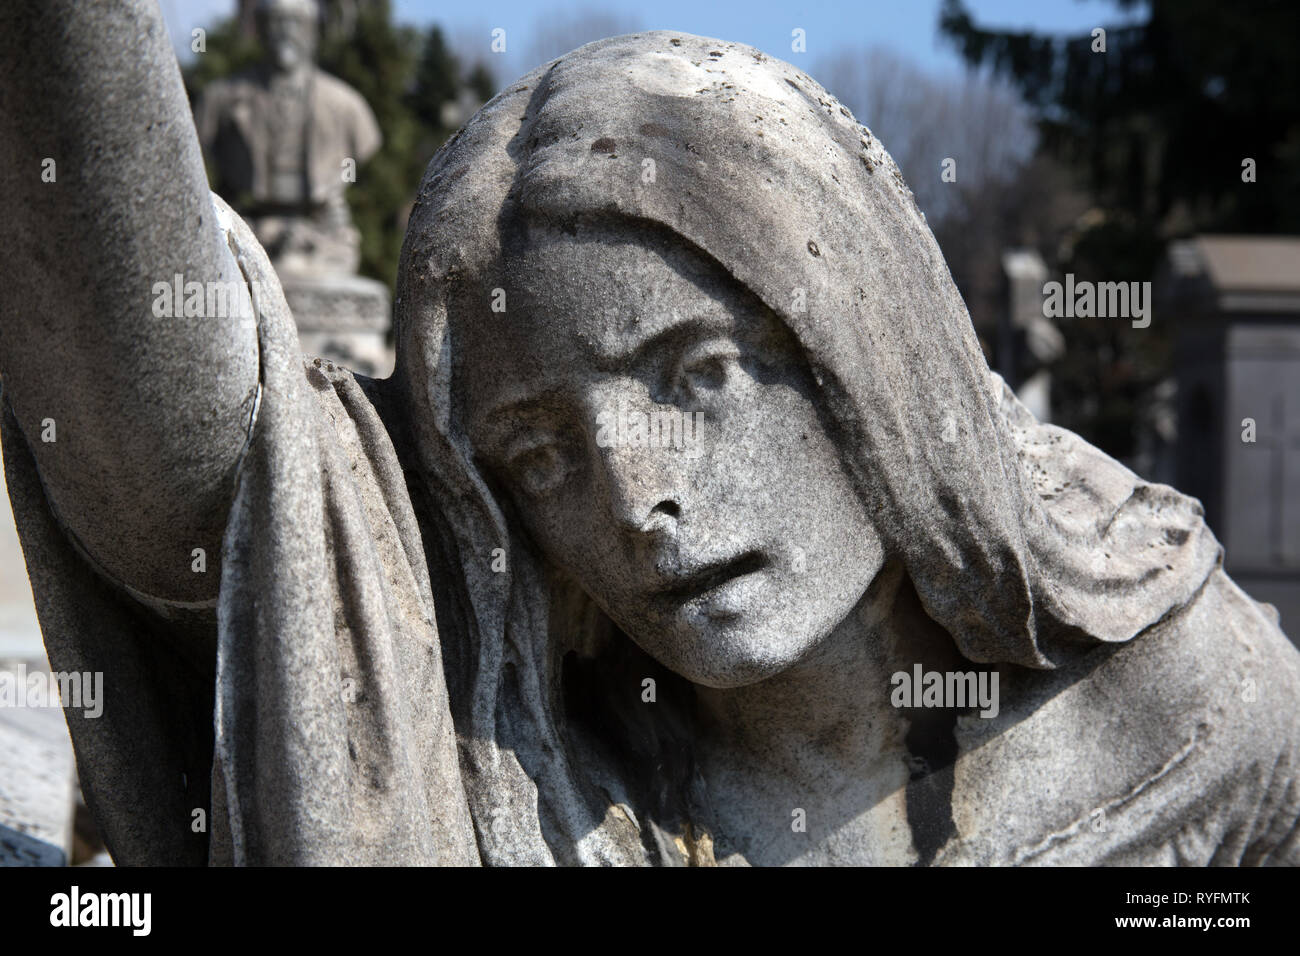 Statue / monument of a young woman reaching out grave stones in the Cimitero Monumentale di Milano - Monumental Cemetery - Milan Italy Stock Photo